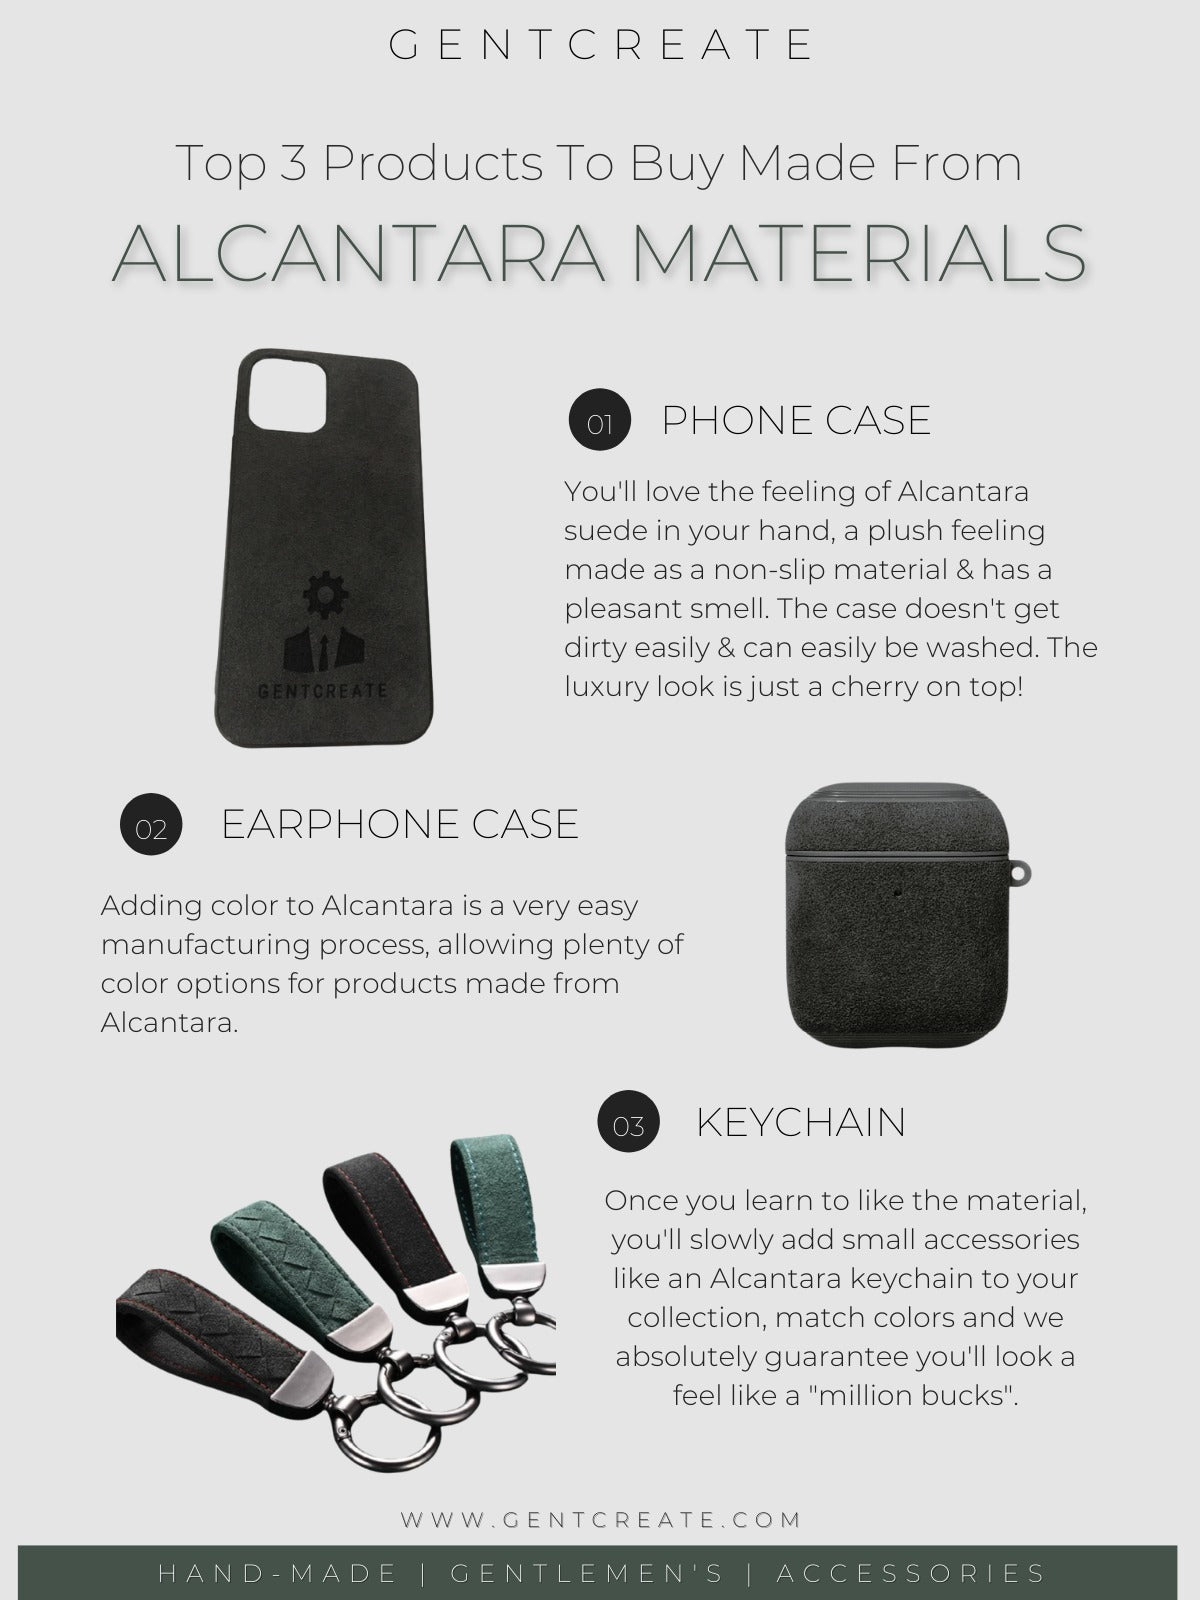 5 Myths About Alcantara Fabric Debunked! – Hydes Leather